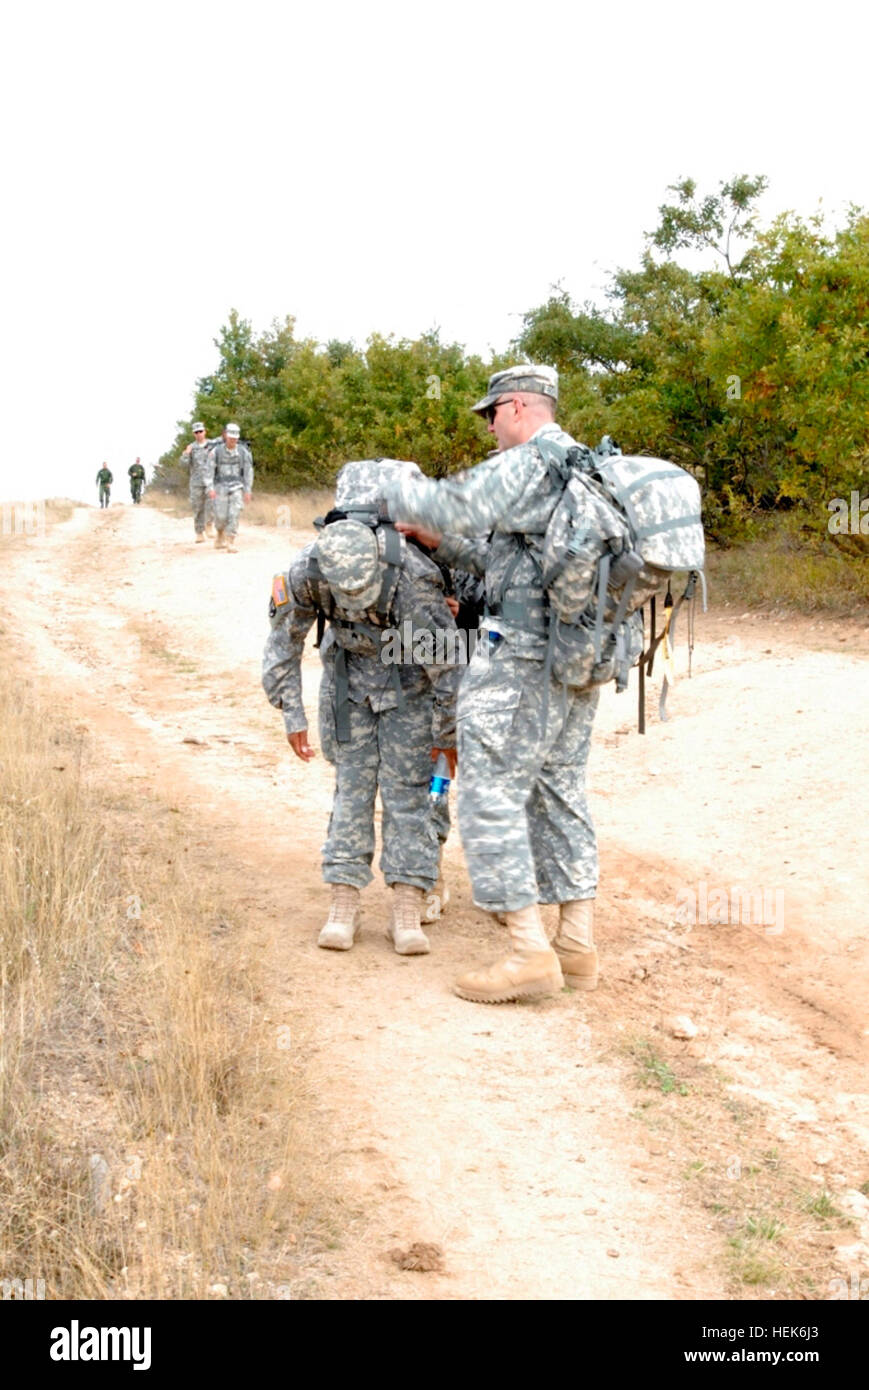 Arkansas National Guard Command Sgt. Major Larry Robinson, Pleasant Plains, Ark., Task Force Aviation, Multinational Battle Group East, helps a soldier adjust her backpack during the Dancon March, Oct. 10. The Dancon March is a 26-kilometer (16-mile) march hosted by the Danish military that brings service members from several countries together for social gathering and endurance test. The march has been a tradition since 1972 in whatever area Danish troops are stationed, including Kosovo, Afghanistan and Iraq. Dancon March brings multinational forces together for 26 grueling kilometers 330442 Stock Photo